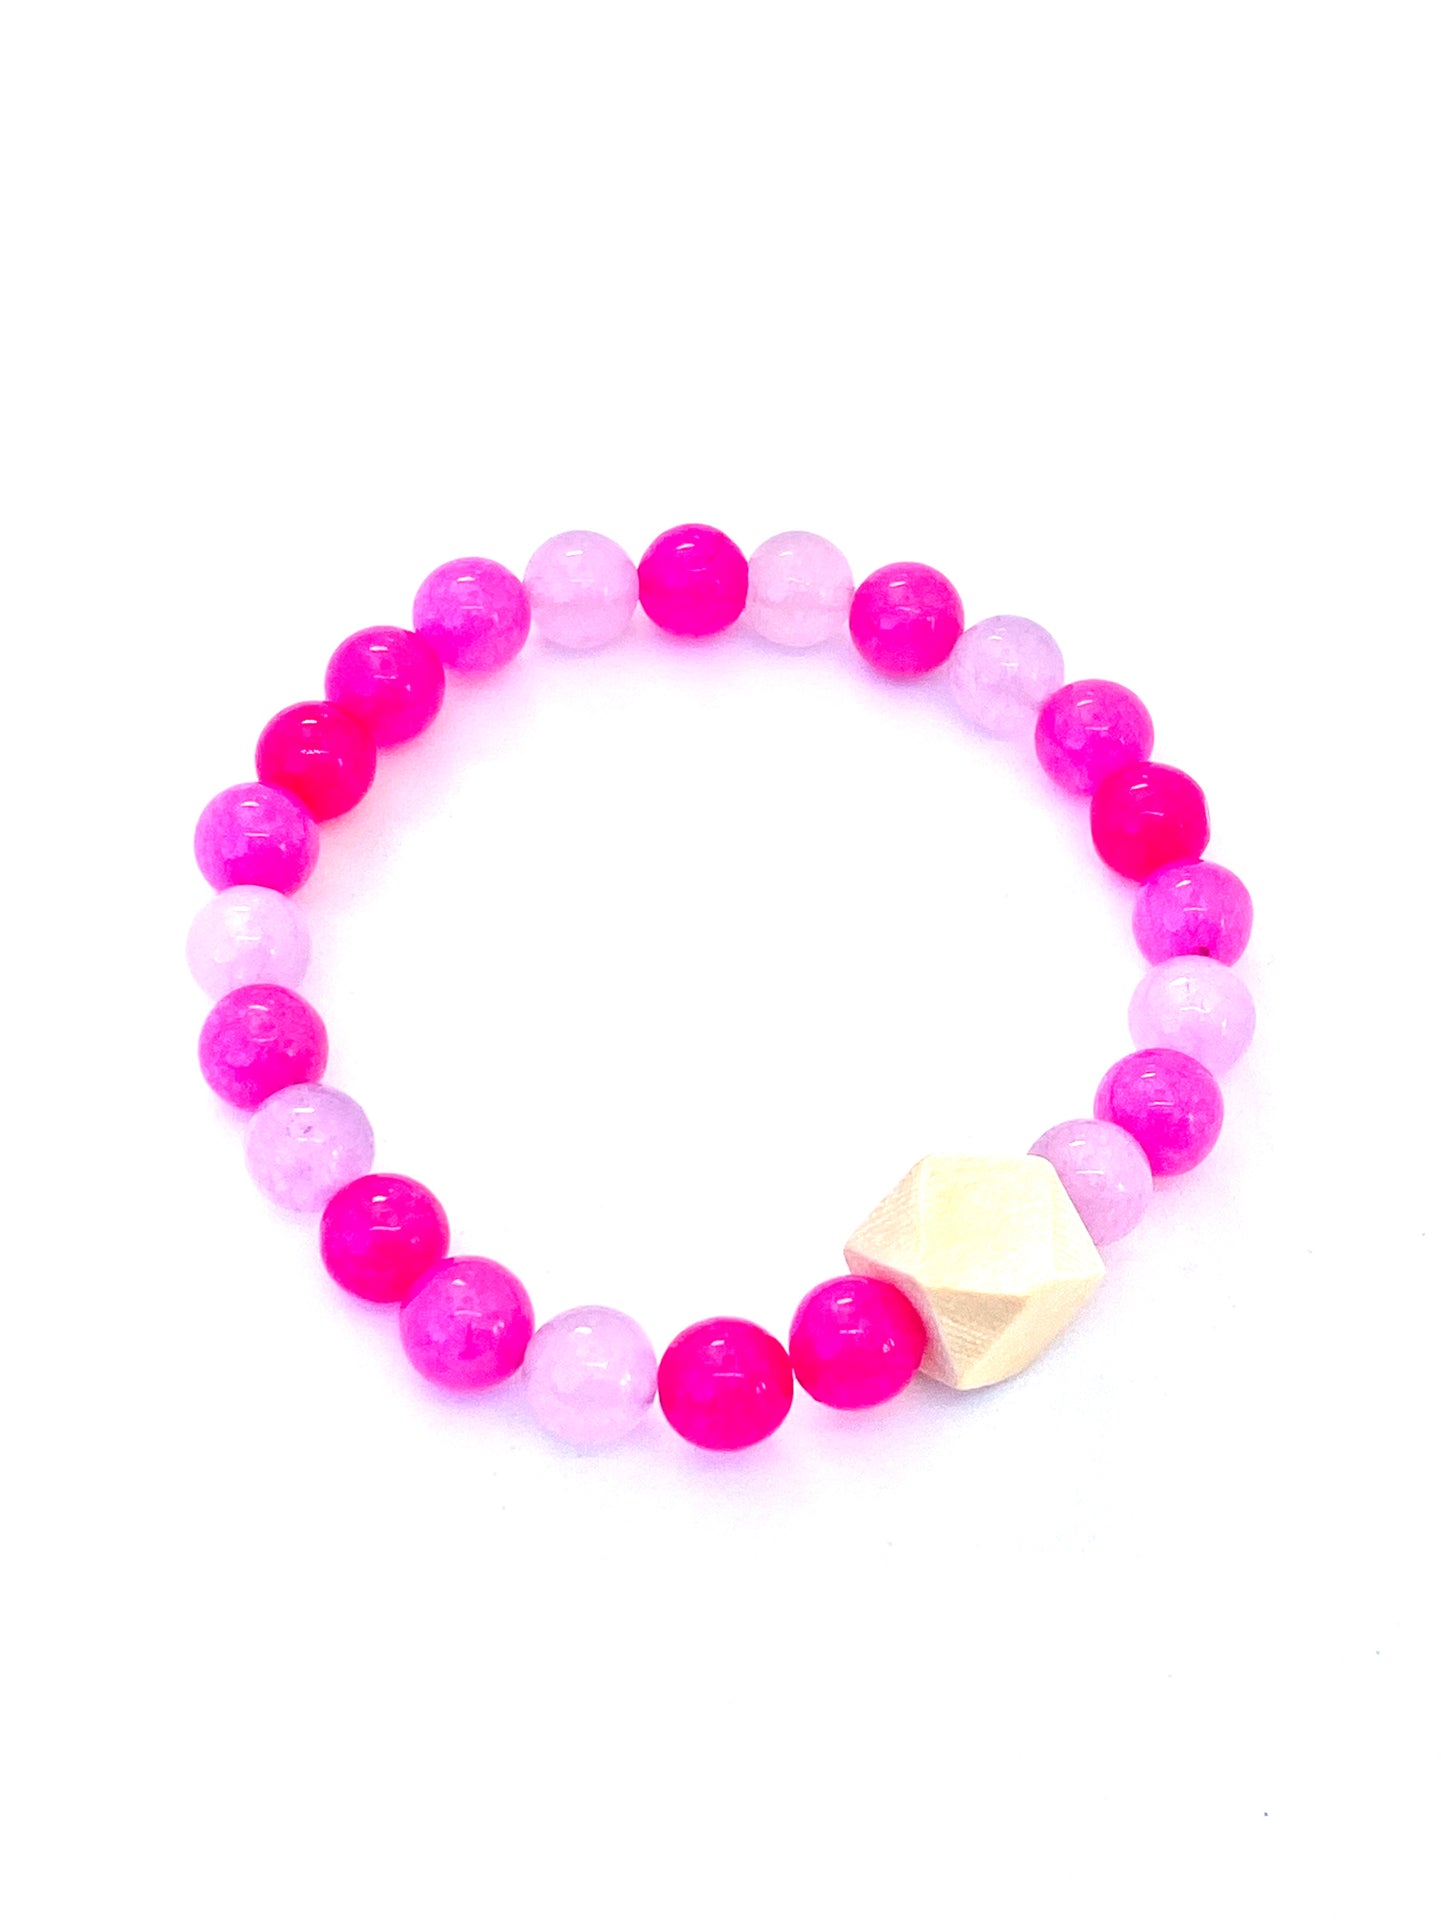 pink Jade essential oil diffuser bracelet with with wooden geometric bead